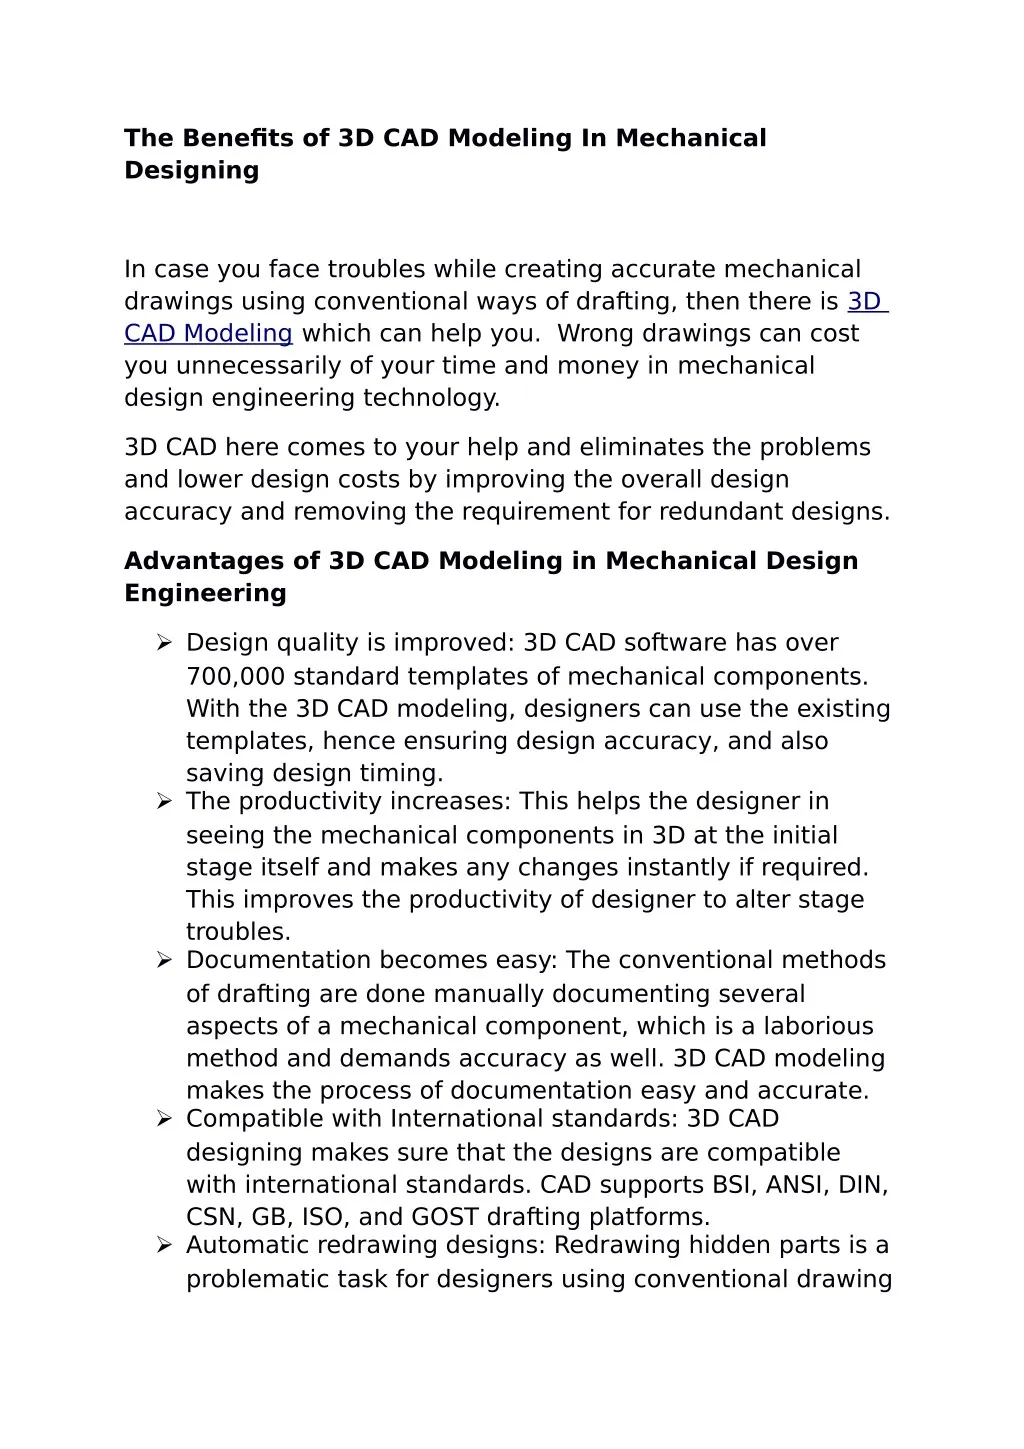 the benefits of 3d cad modeling in mechanical